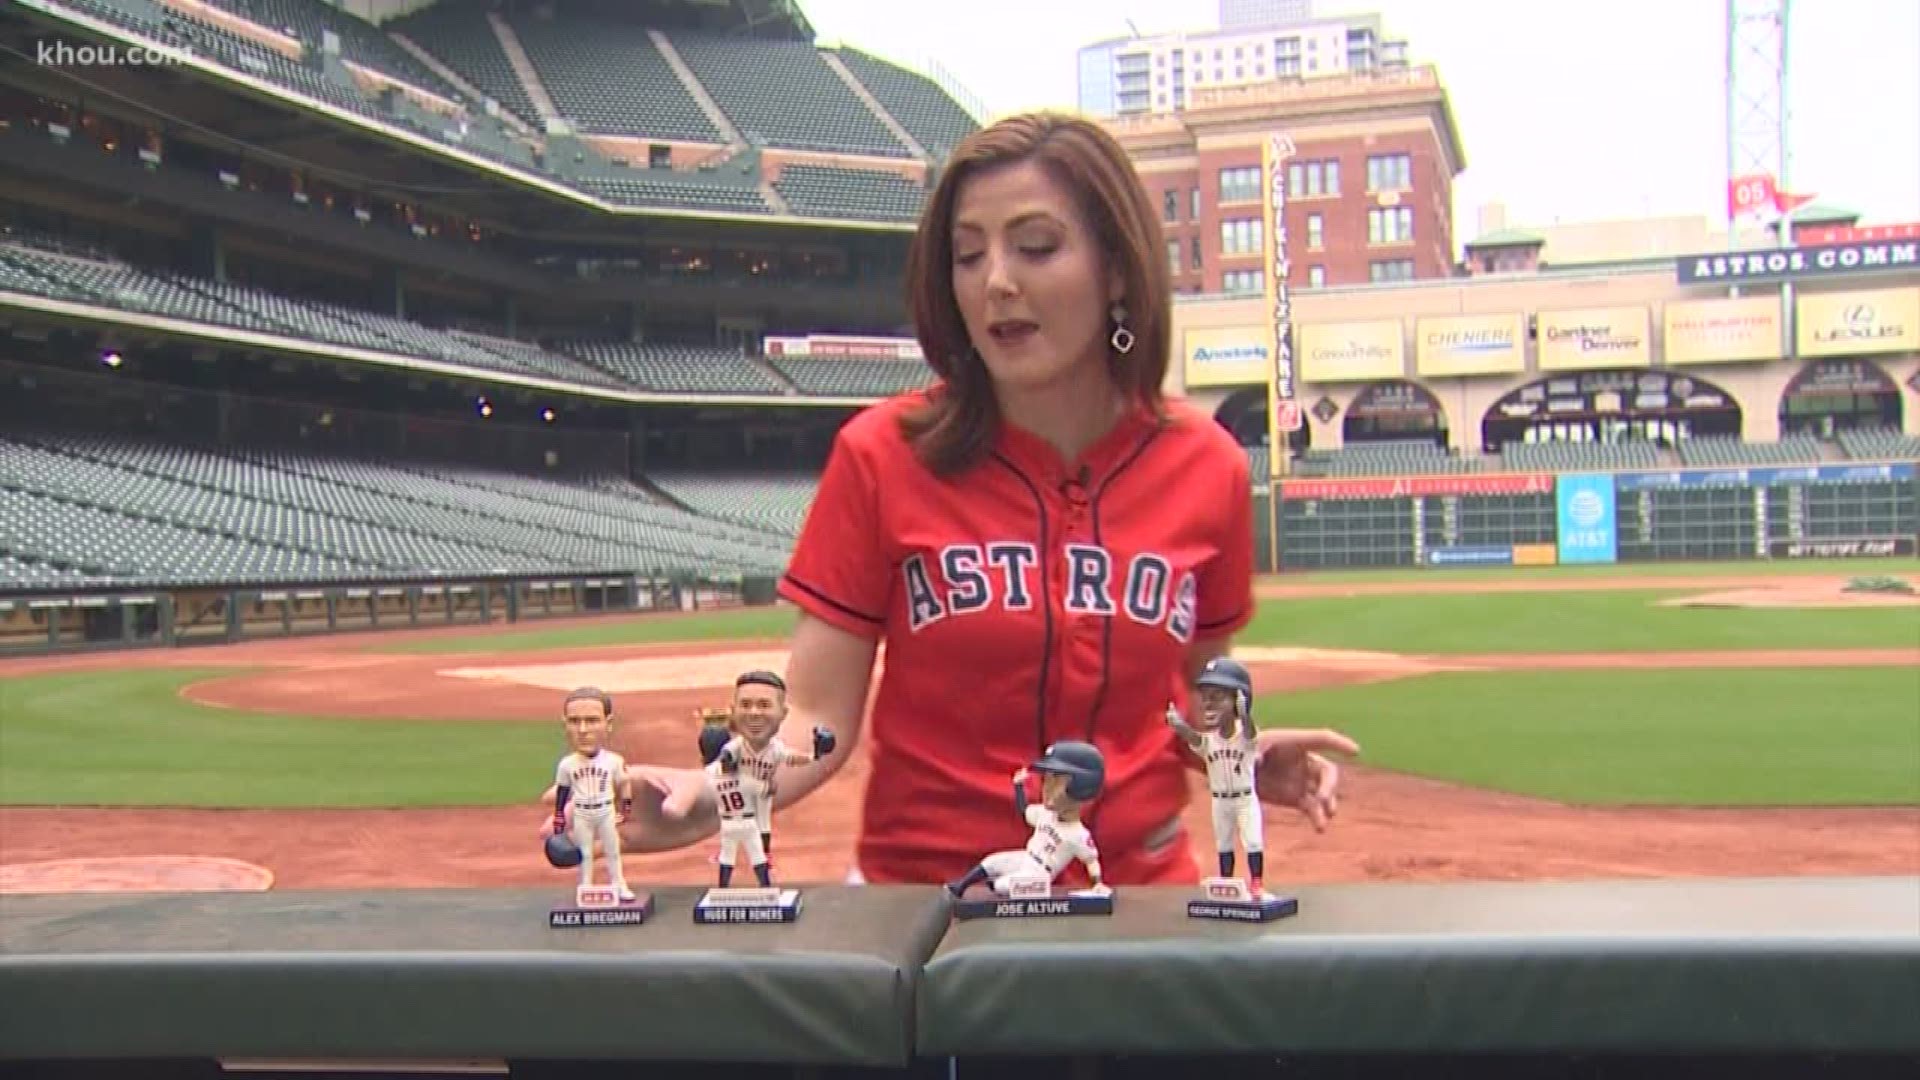 Jerseys, bobbleheads, hats, oh, my! The Astros are giving away a whole lot of swag this season.